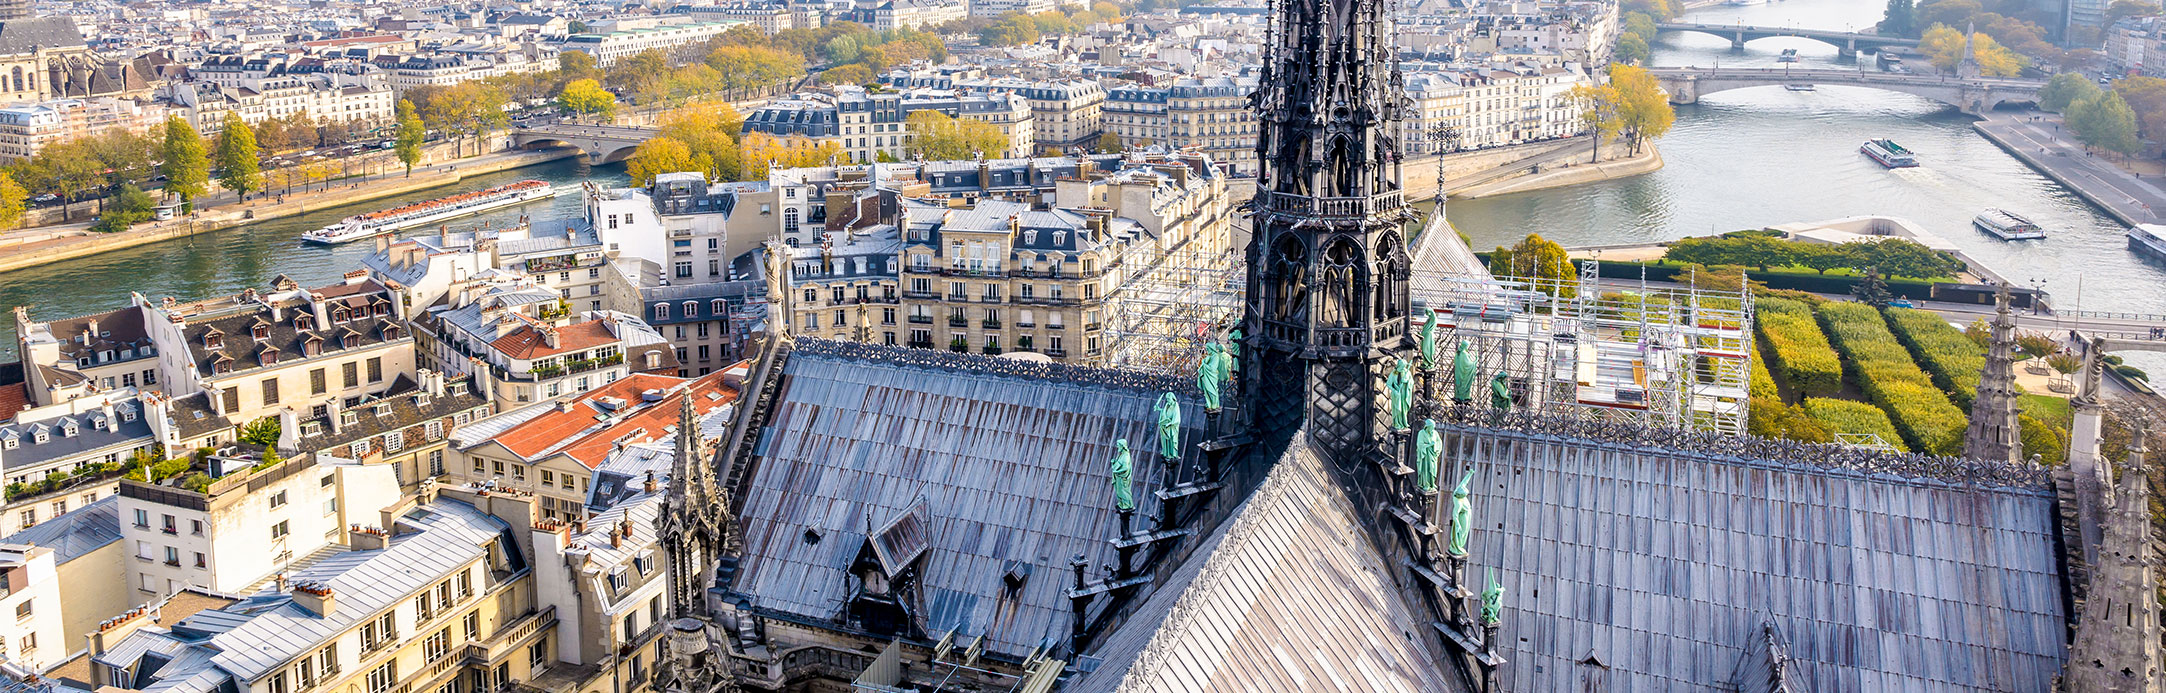 Notre-Dame de Paris fire and its impact on the level of lead pollution in the Paris region